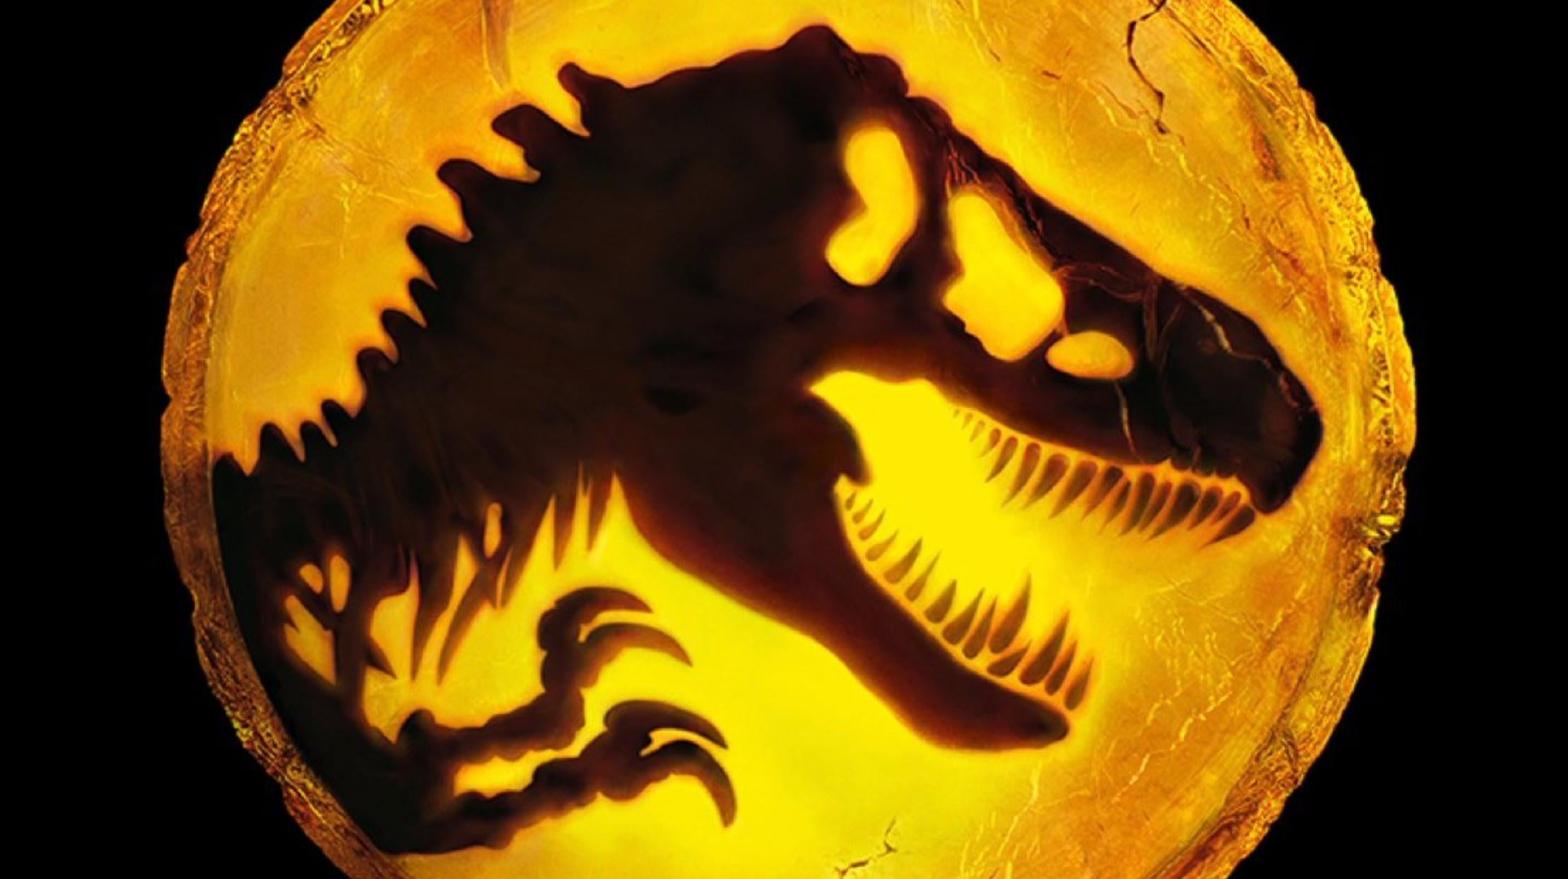 Jurassic World: Dominion is coming next year. (Image: Universal Pictures)